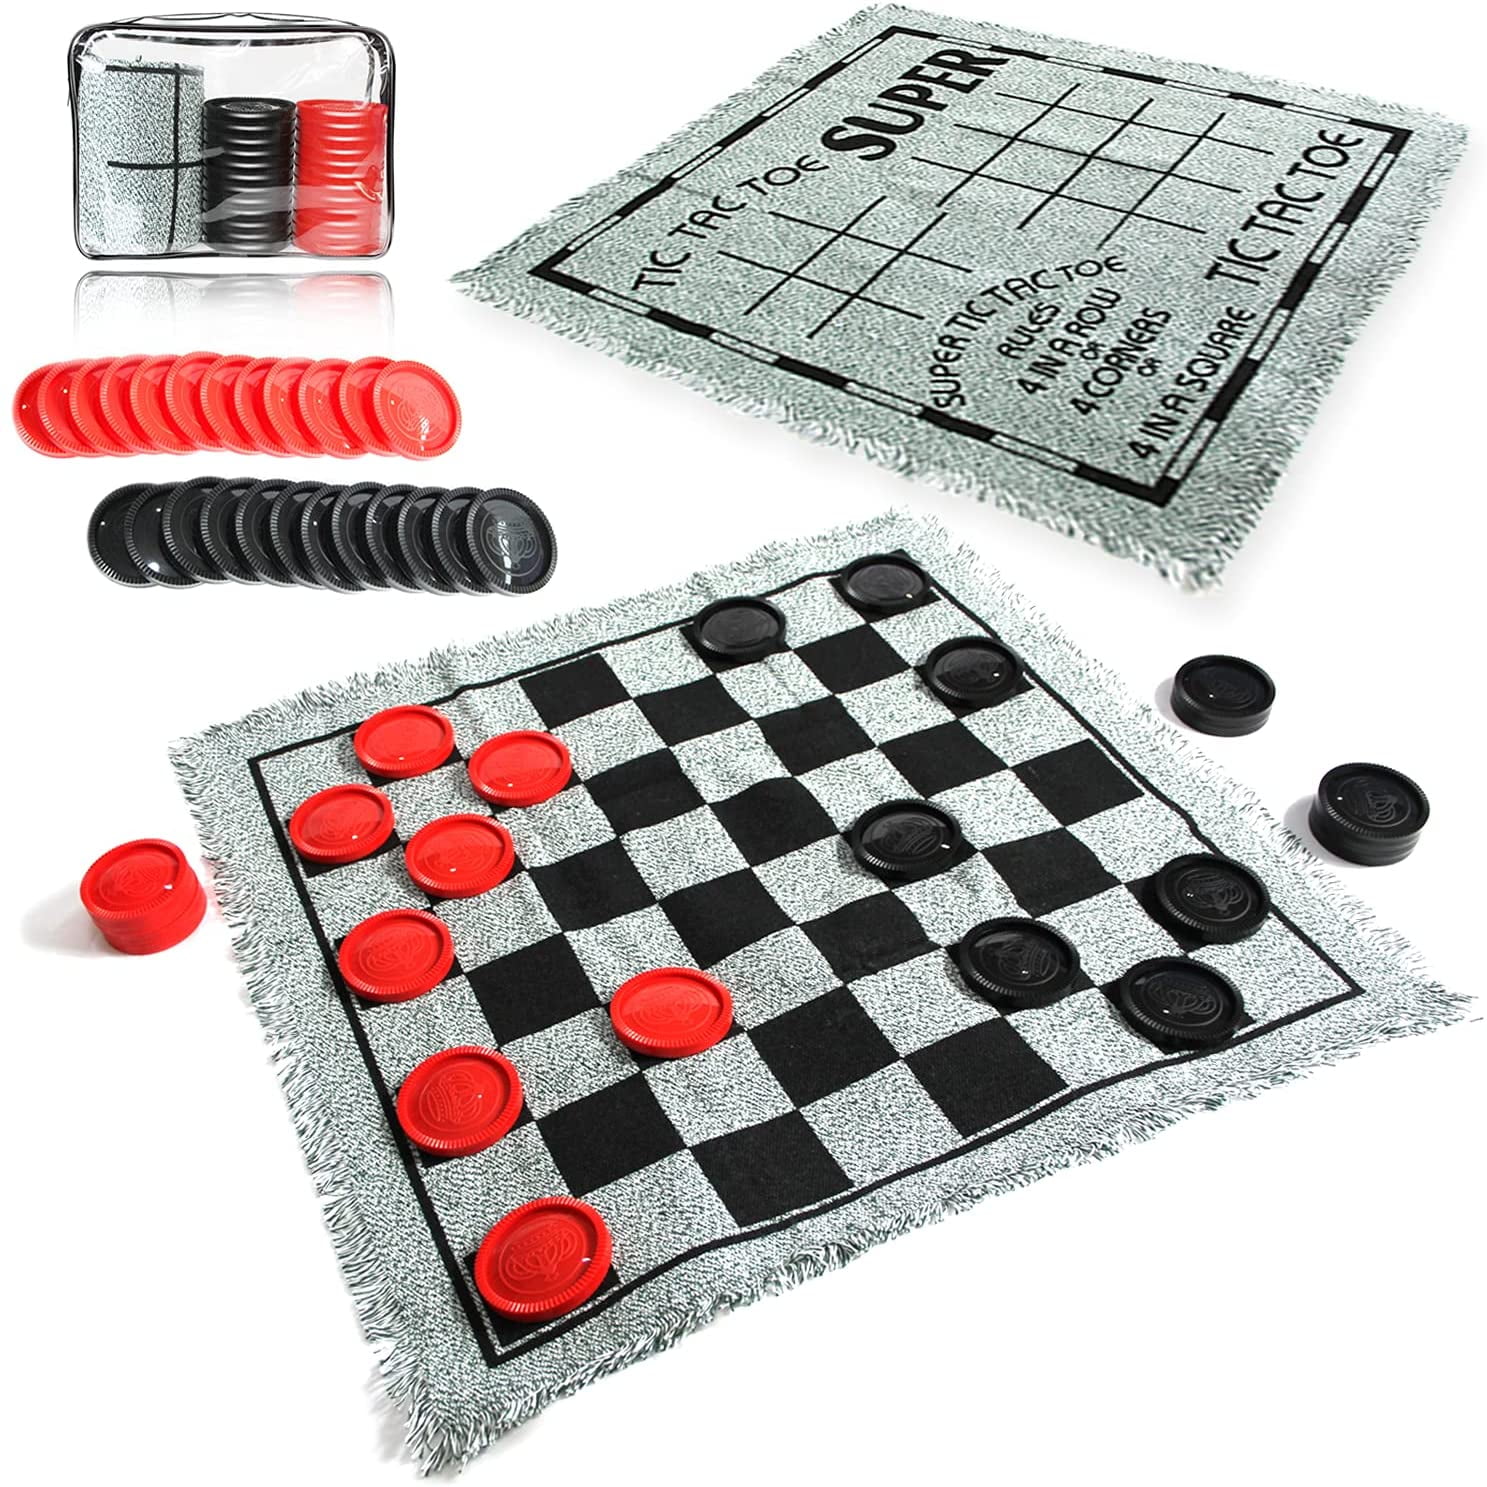 OTTARO Giant Tic Tac Toe Game Outdoor Indoor for Family 3ft x 3ft Outdoor Bean Bag Toss Game for Adults and Kids 